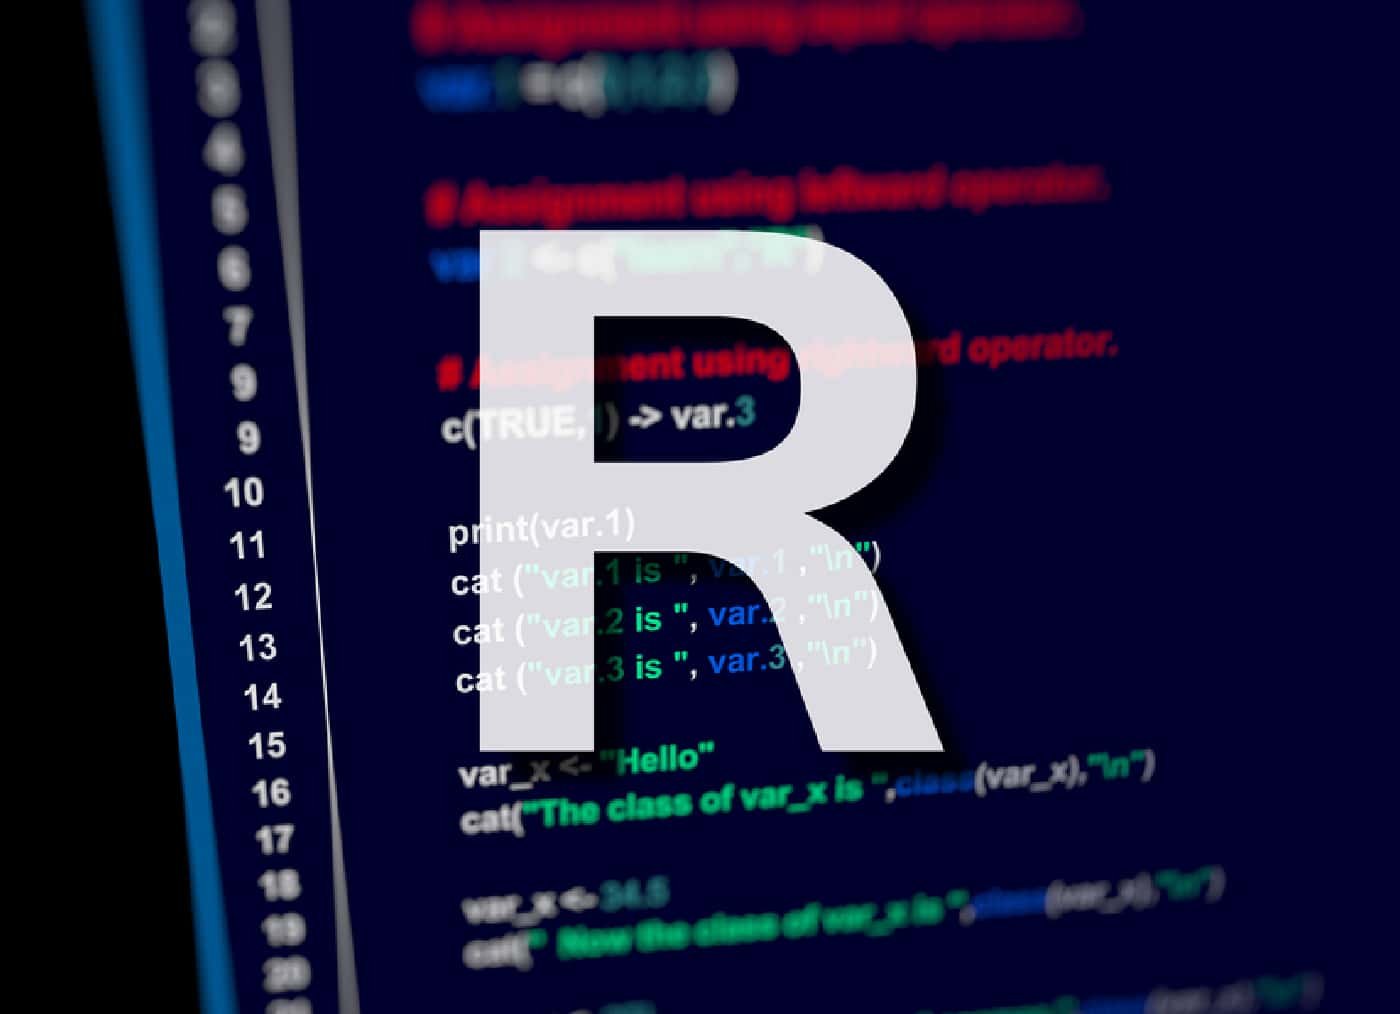 Types of Functions in R Programming